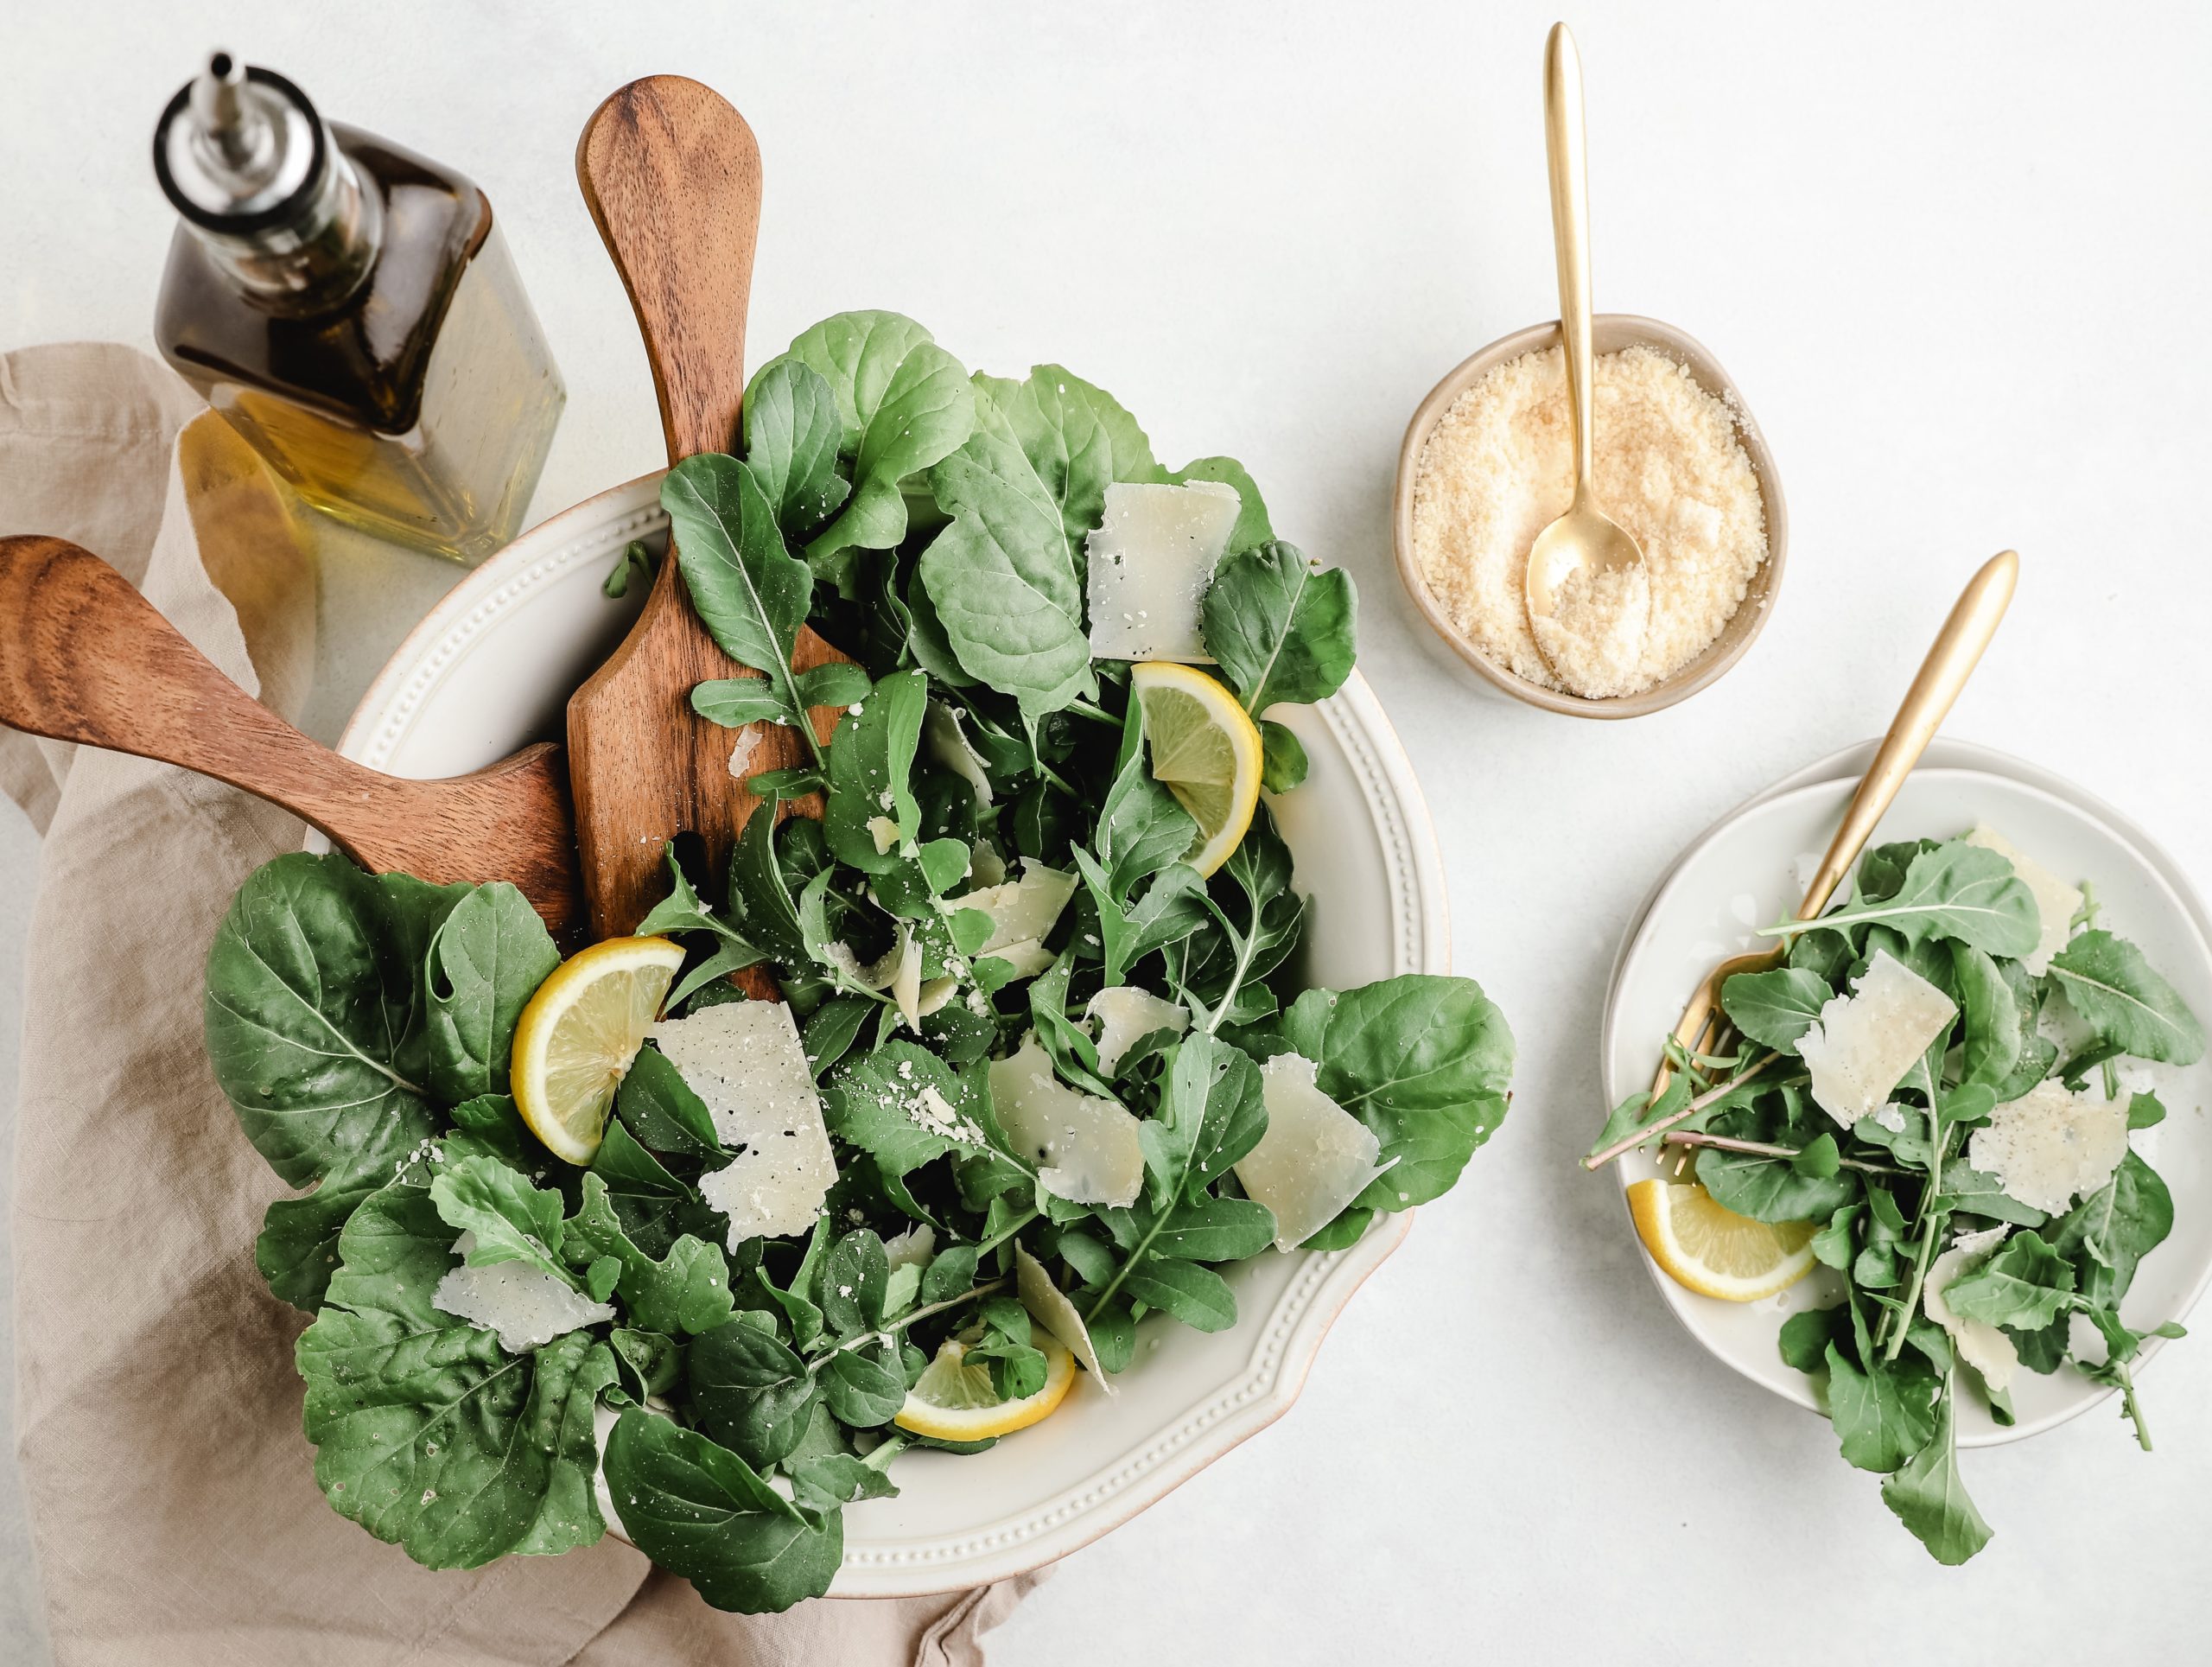 Spinach salad with lemon and cheese garnishes.